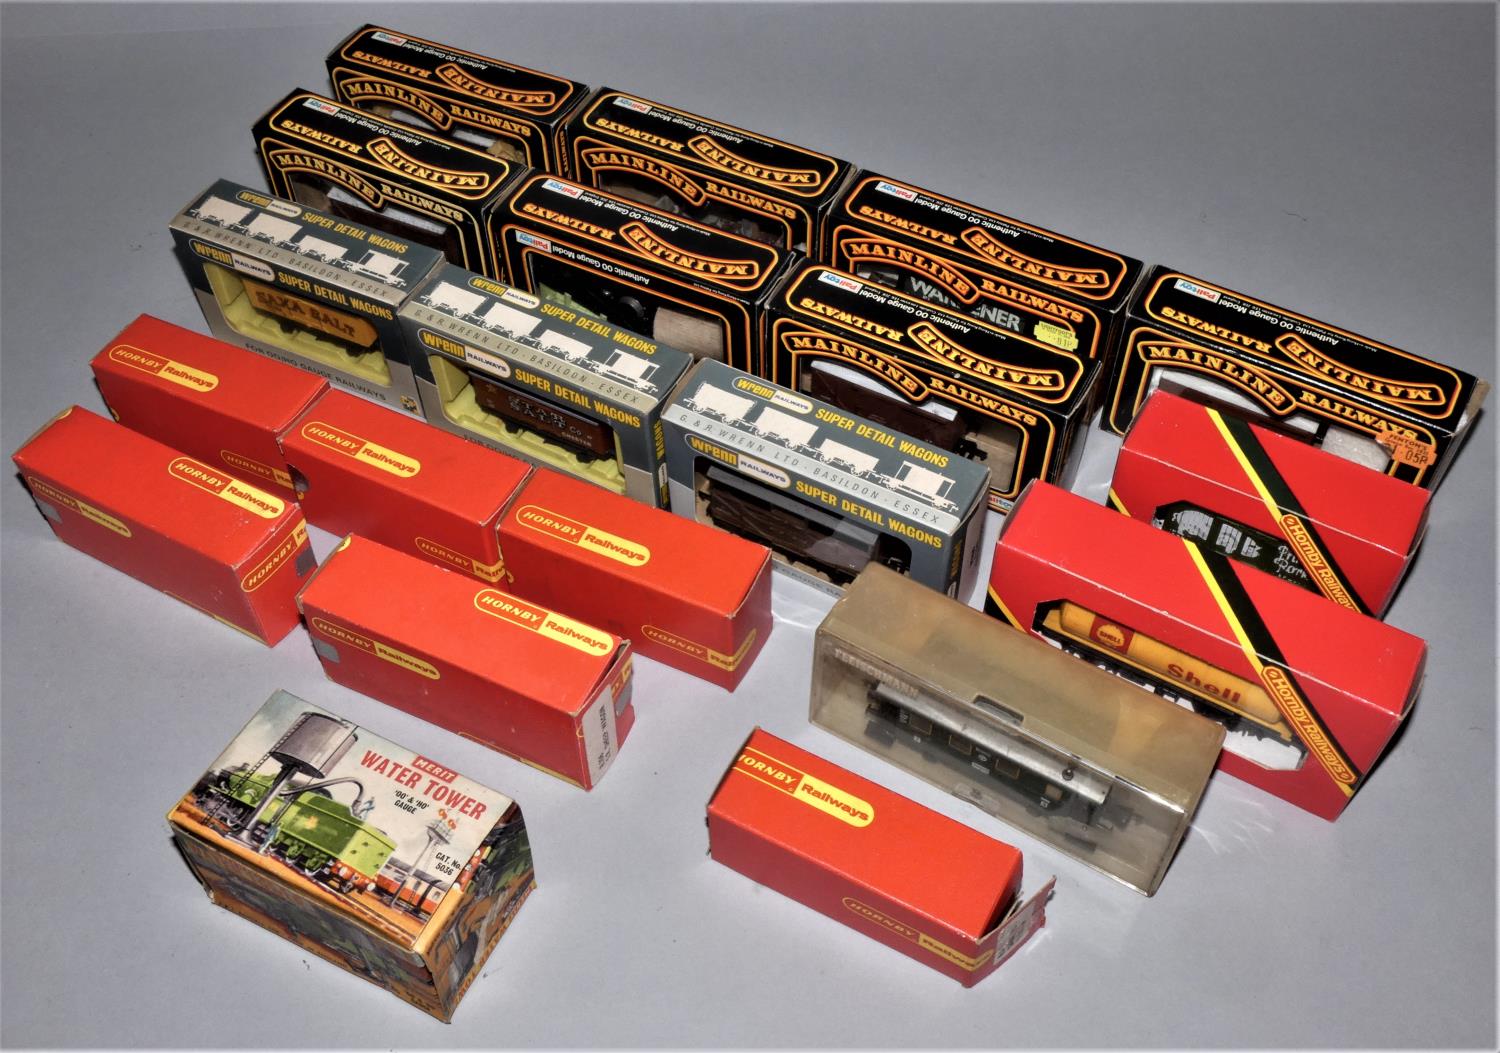 Eighteen 00 gauge goods wagons, Hornby, Mainline and Wrenn, many in original boxes (18).